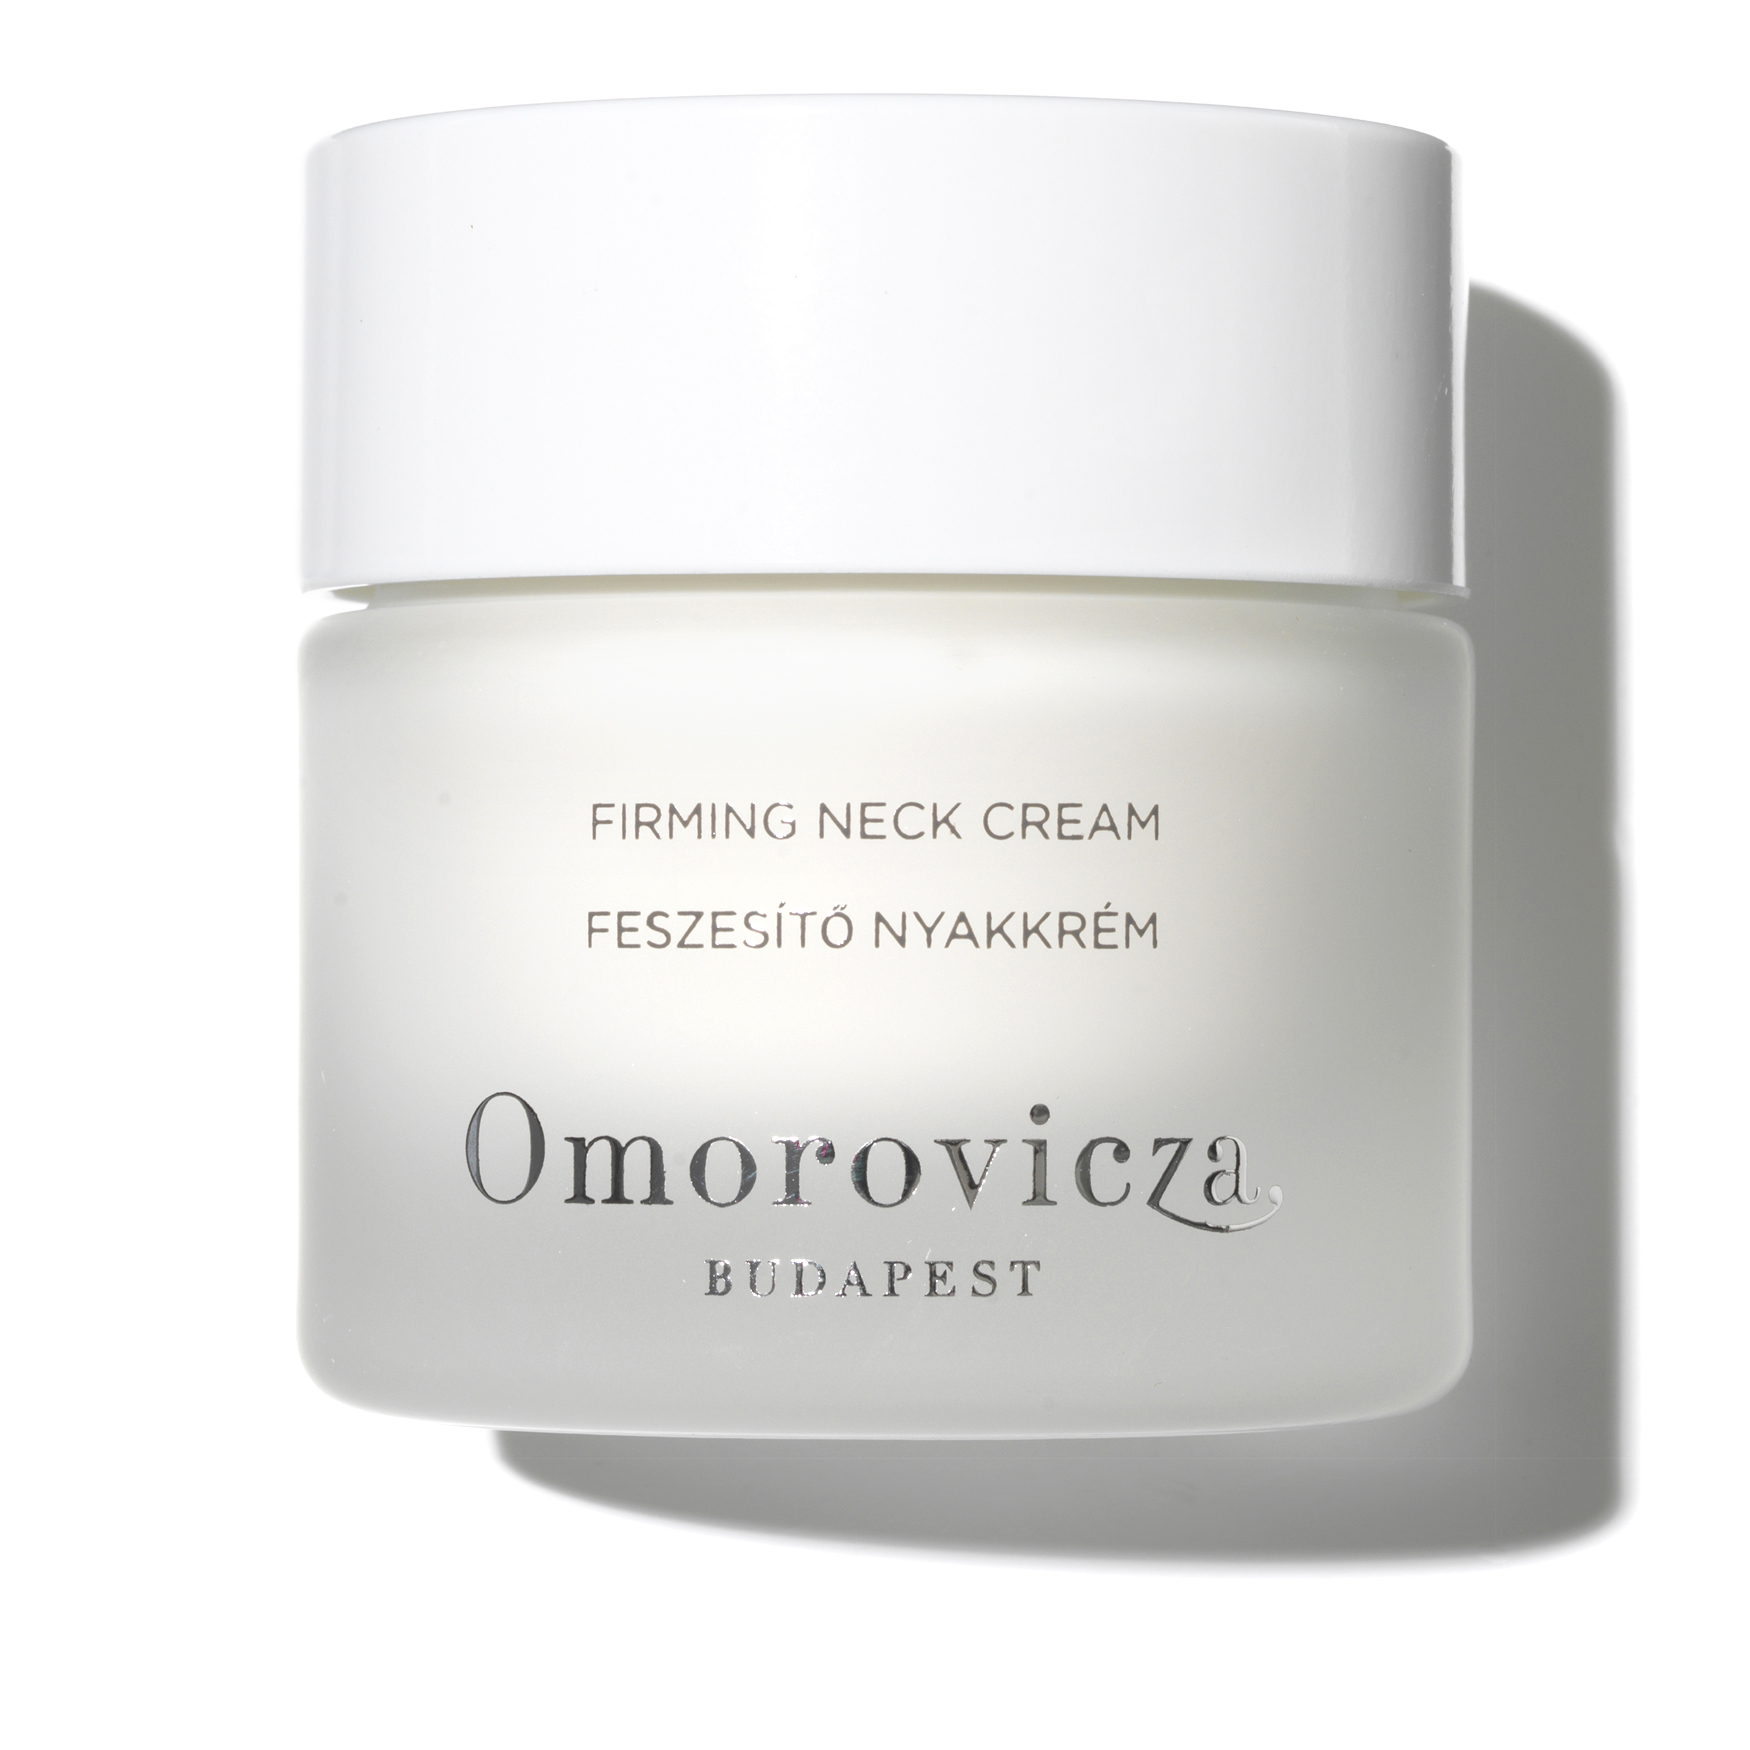 Omorovicza Firming Neck Cream | Space NK